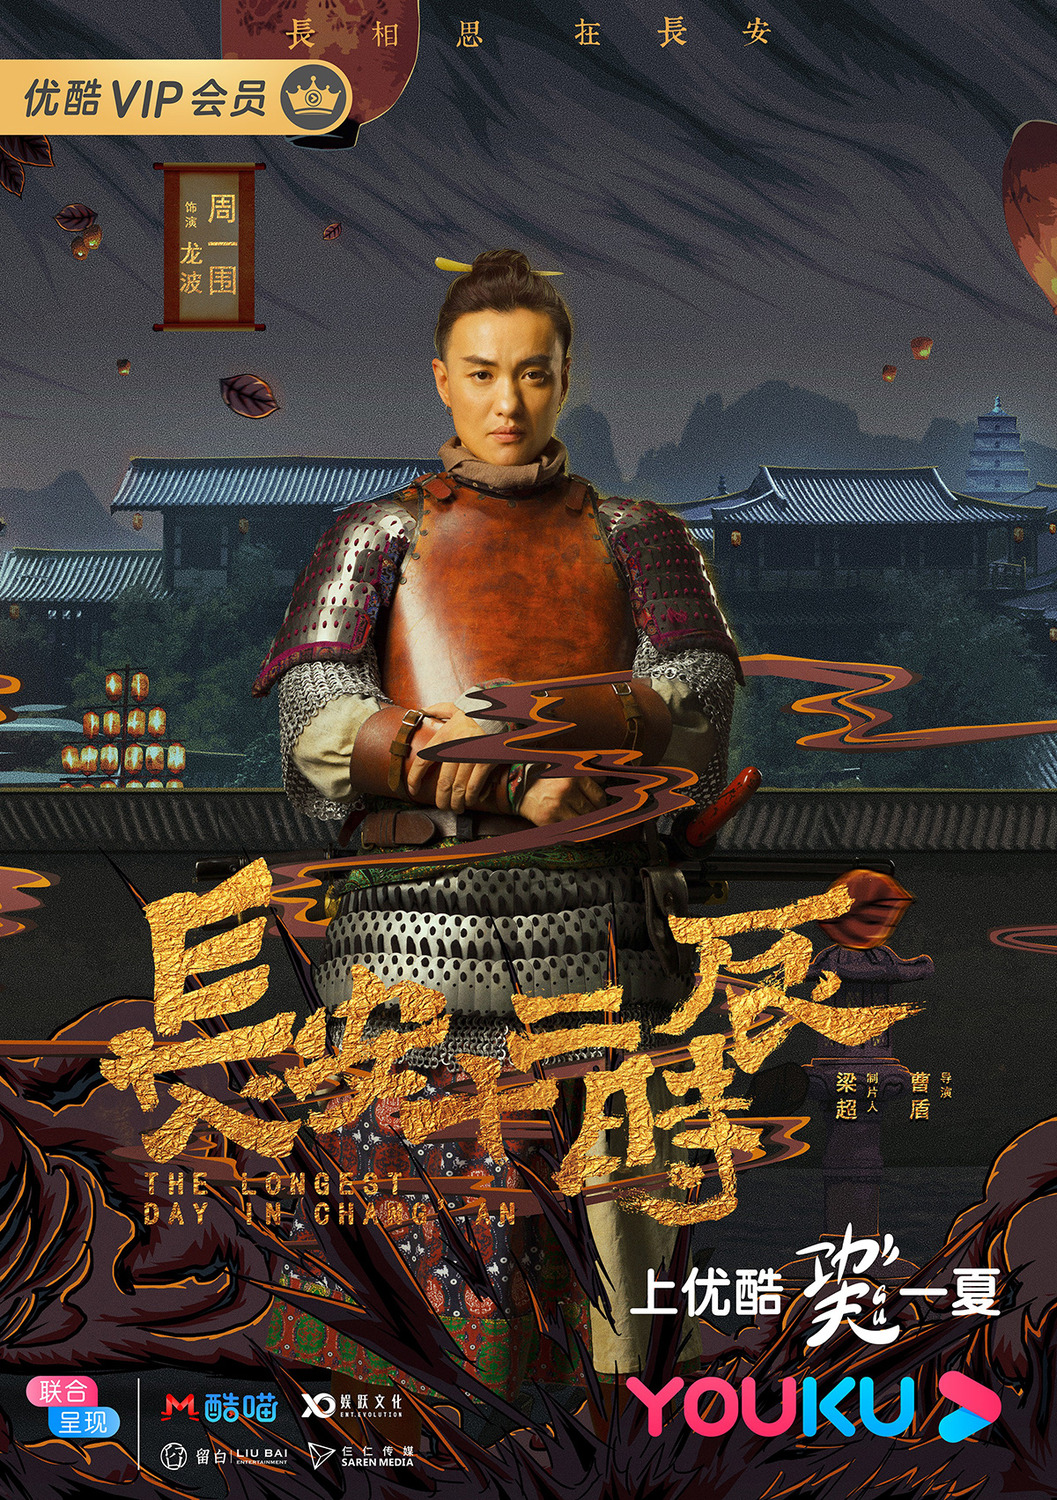 Extra Large TV Poster Image for Chang'an shi er shi chen (#7 of 18)